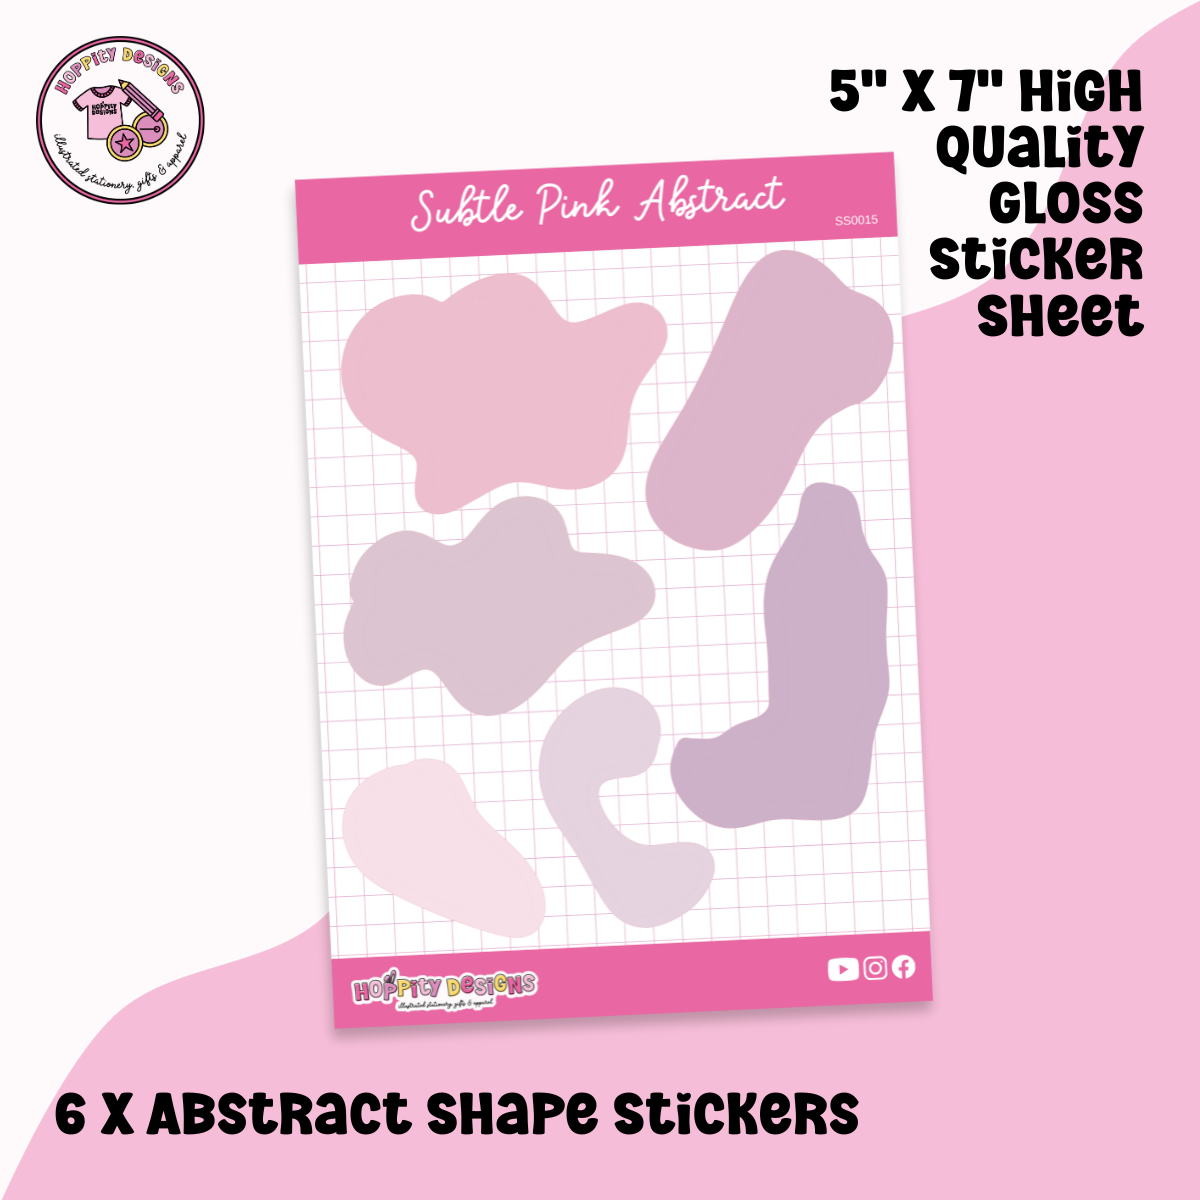 Subtle Pink Abstract Planner Stickers - SS0015